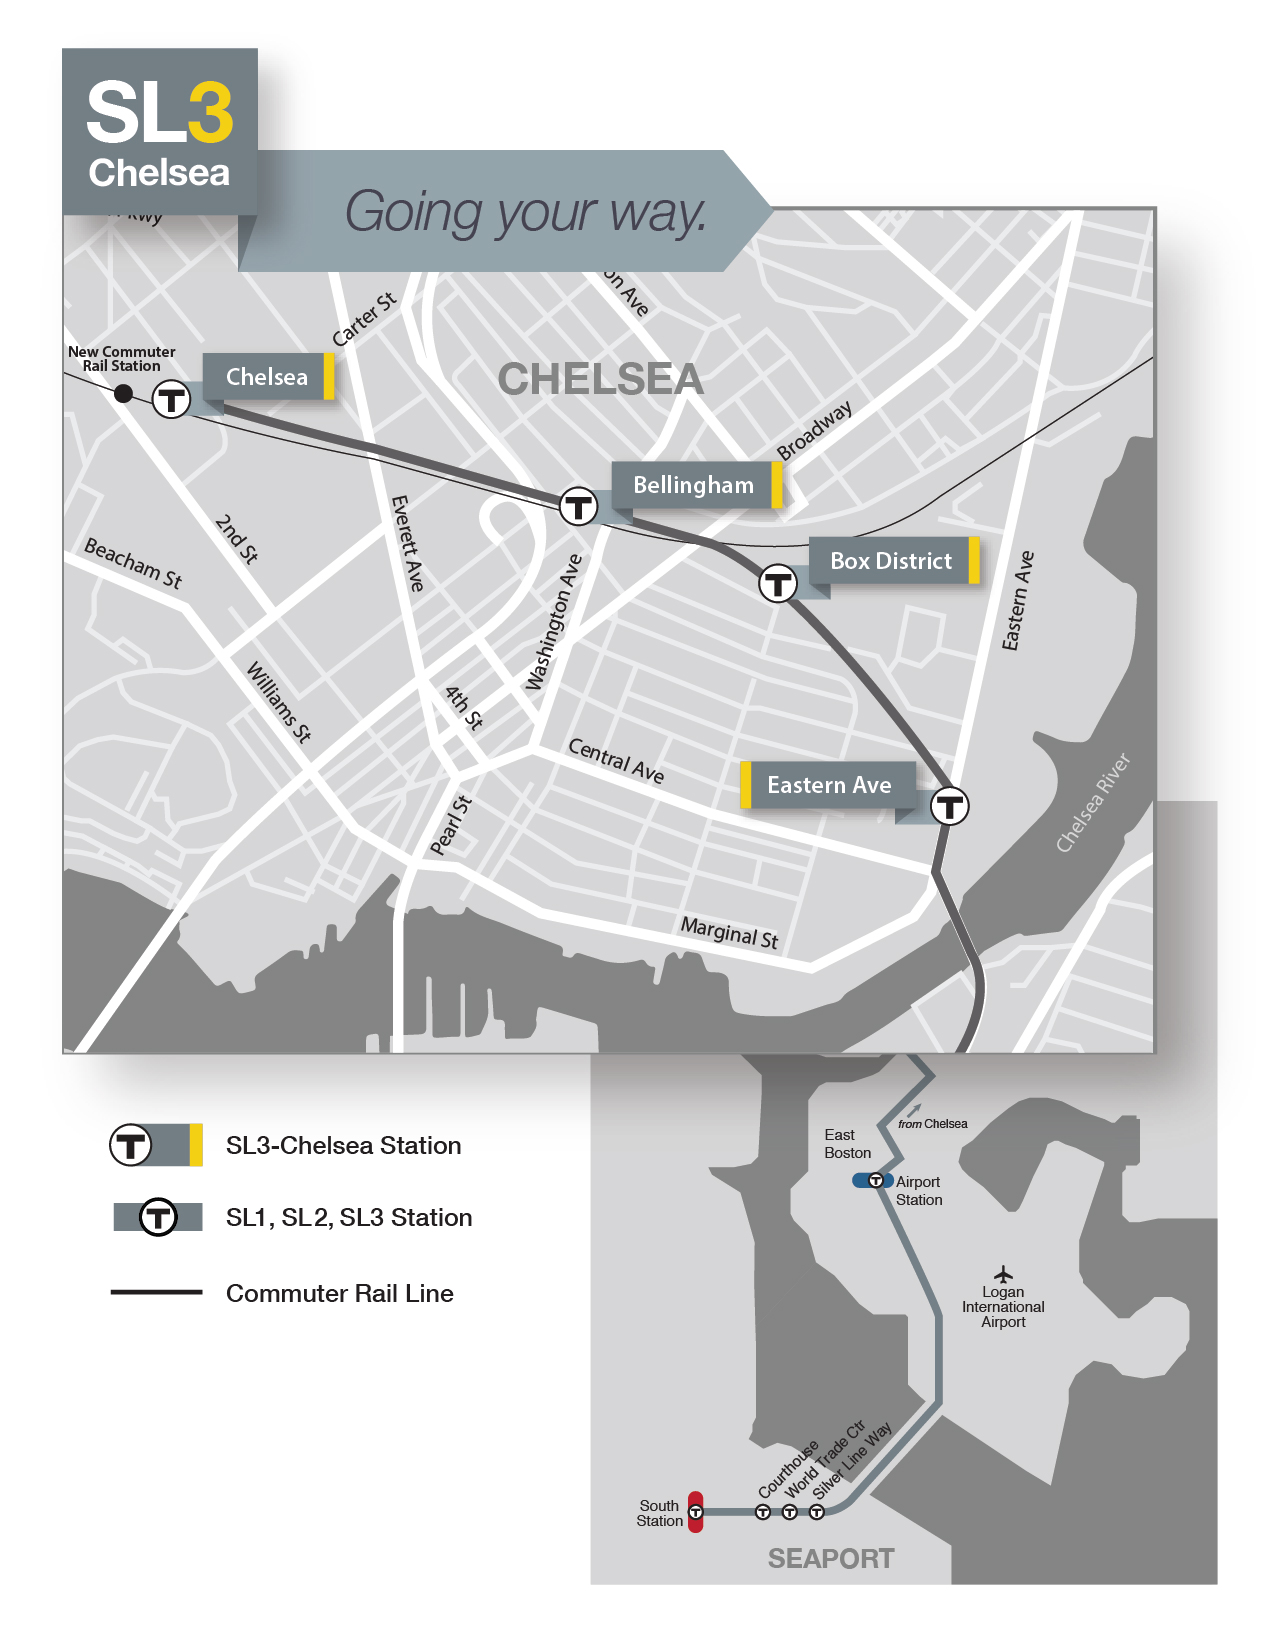 Stylized map of SL3 stops and its route from Chelsea to South Station